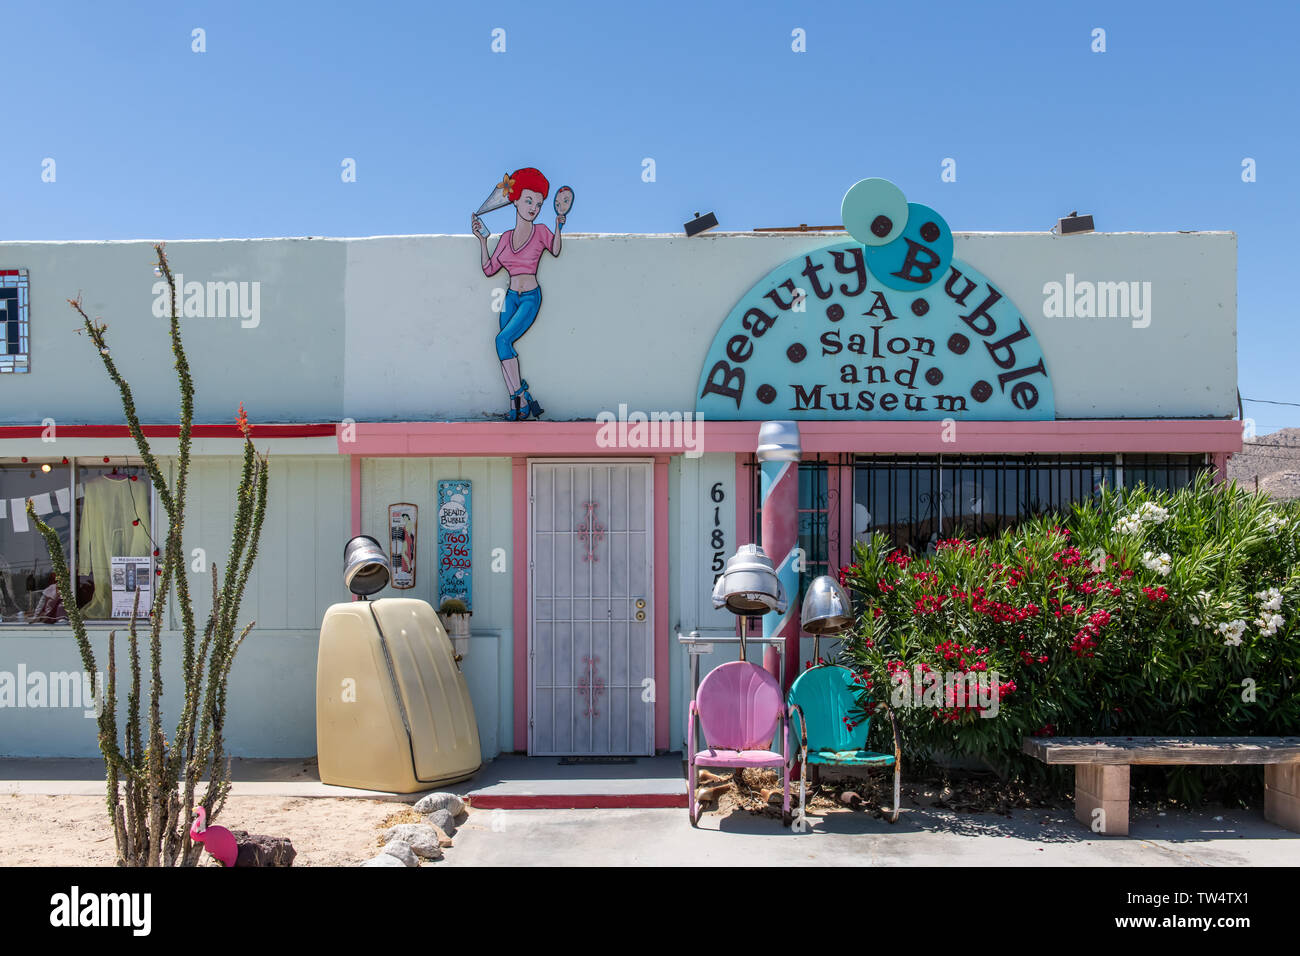 Beauty Bubble - a salon and museum in Yucca Valley, California Stock Photo